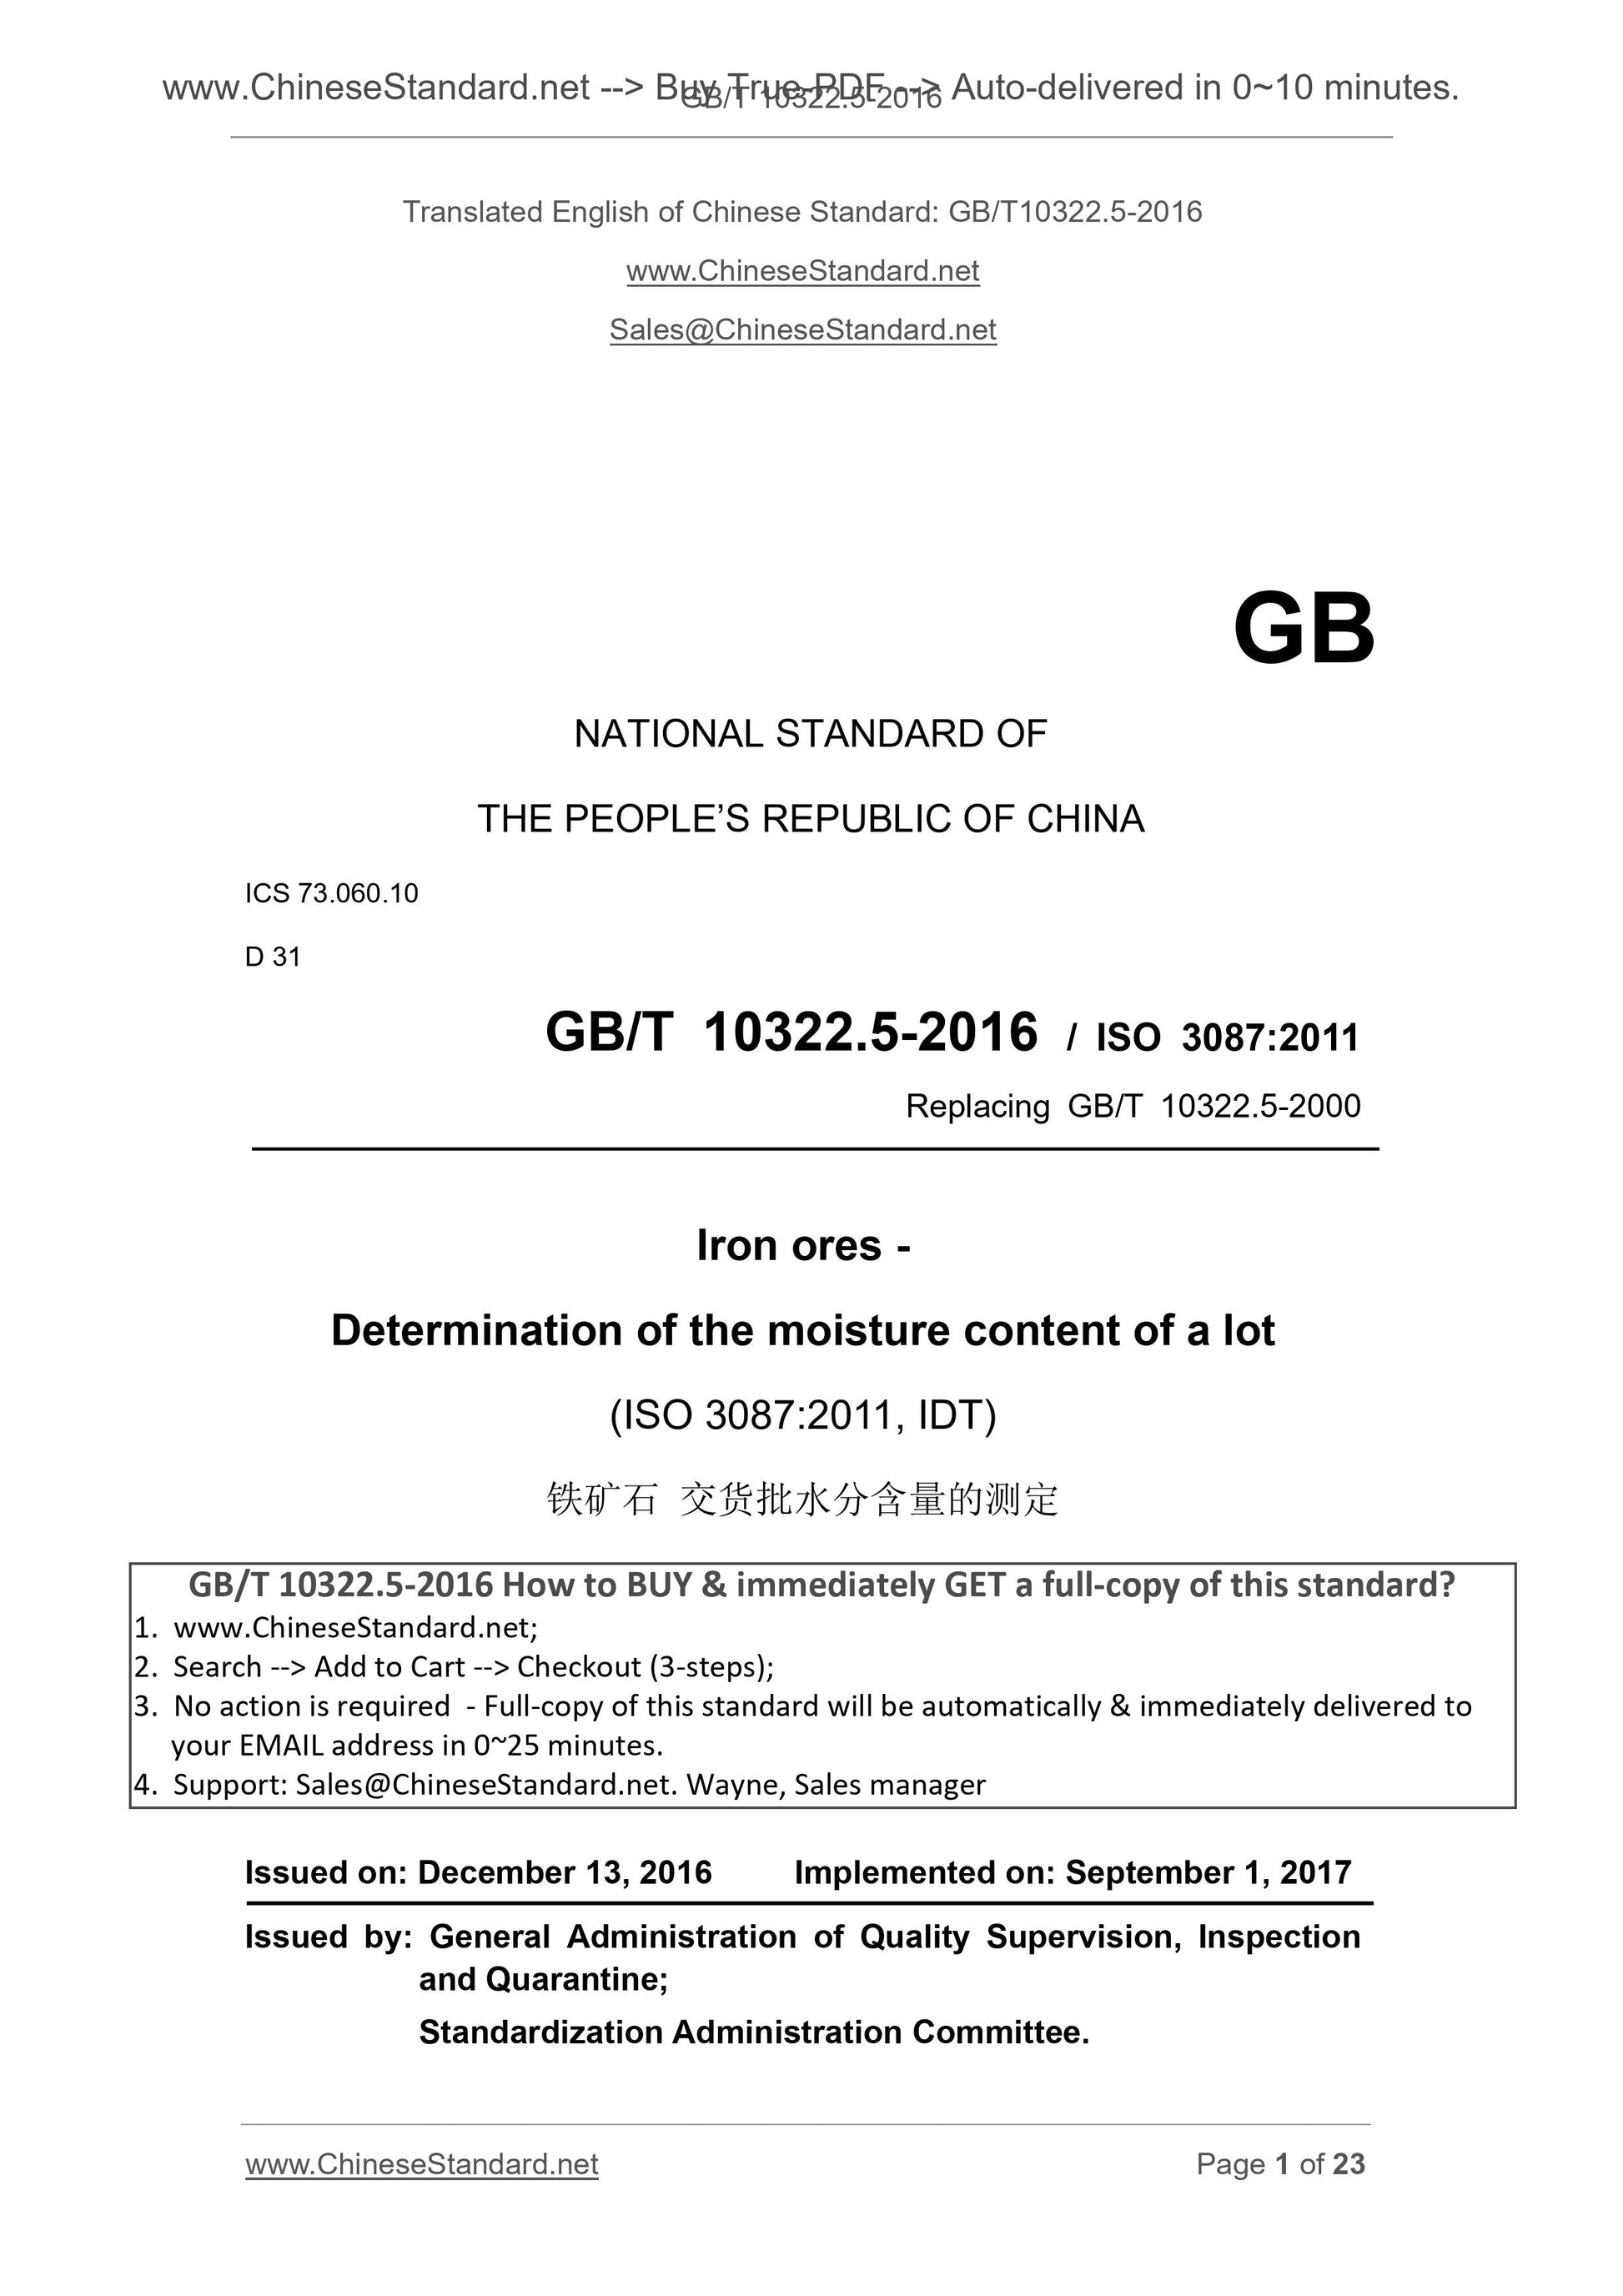 GB/T 10322.5-2016 Page 1